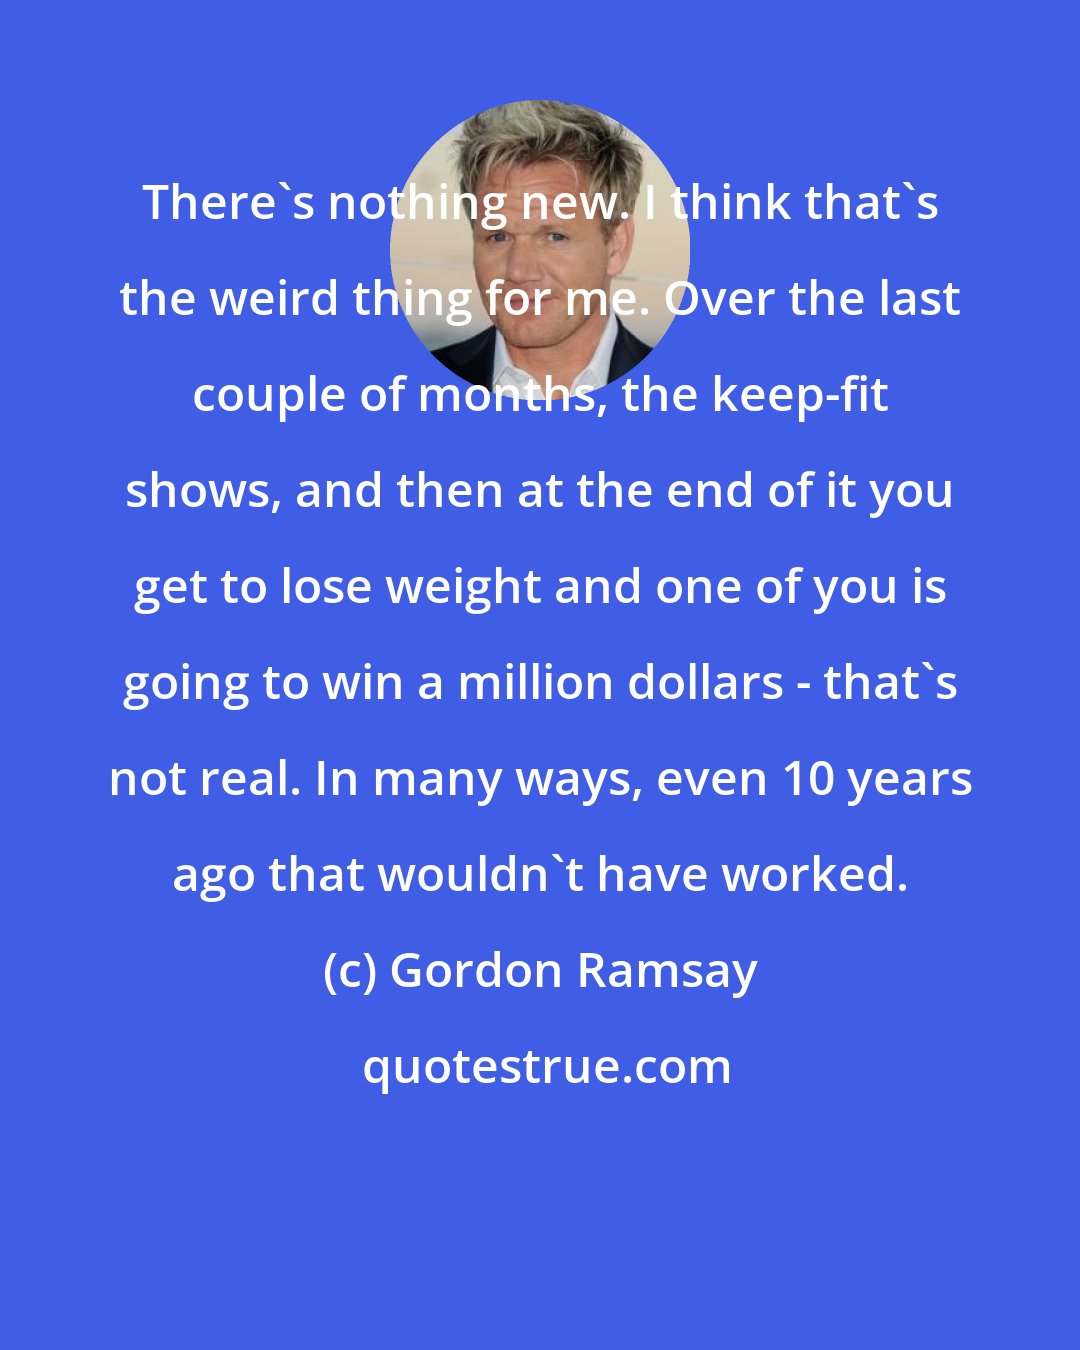 Gordon Ramsay: There's nothing new. I think that's the weird thing for me. Over the last couple of months, the keep-fit shows, and then at the end of it you get to lose weight and one of you is going to win a million dollars - that's not real. In many ways, even 10 years ago that wouldn't have worked.